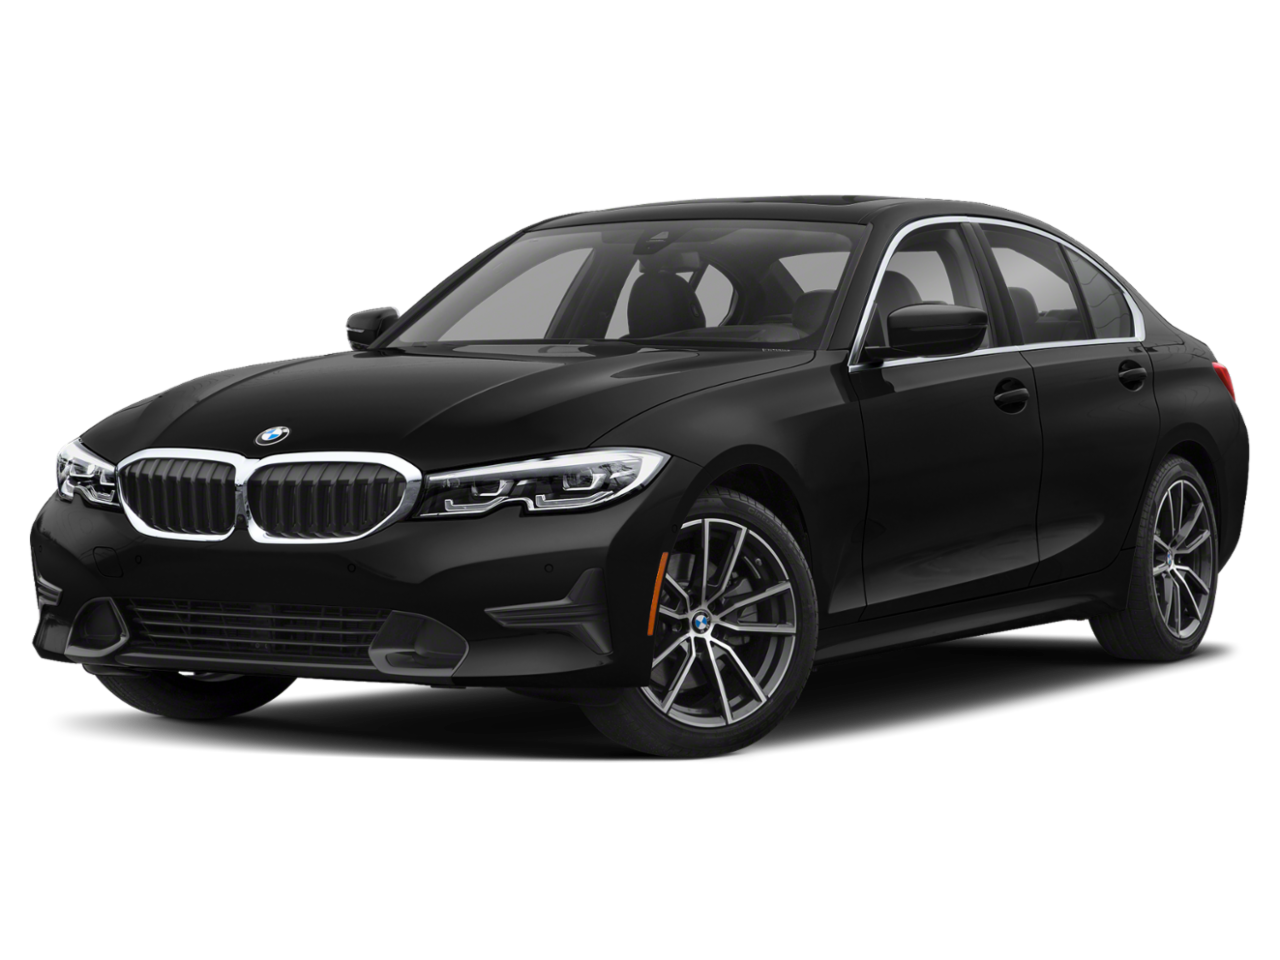 New BMW 330i xDrive from your Tampa, FL dealership, Ferman Automotive